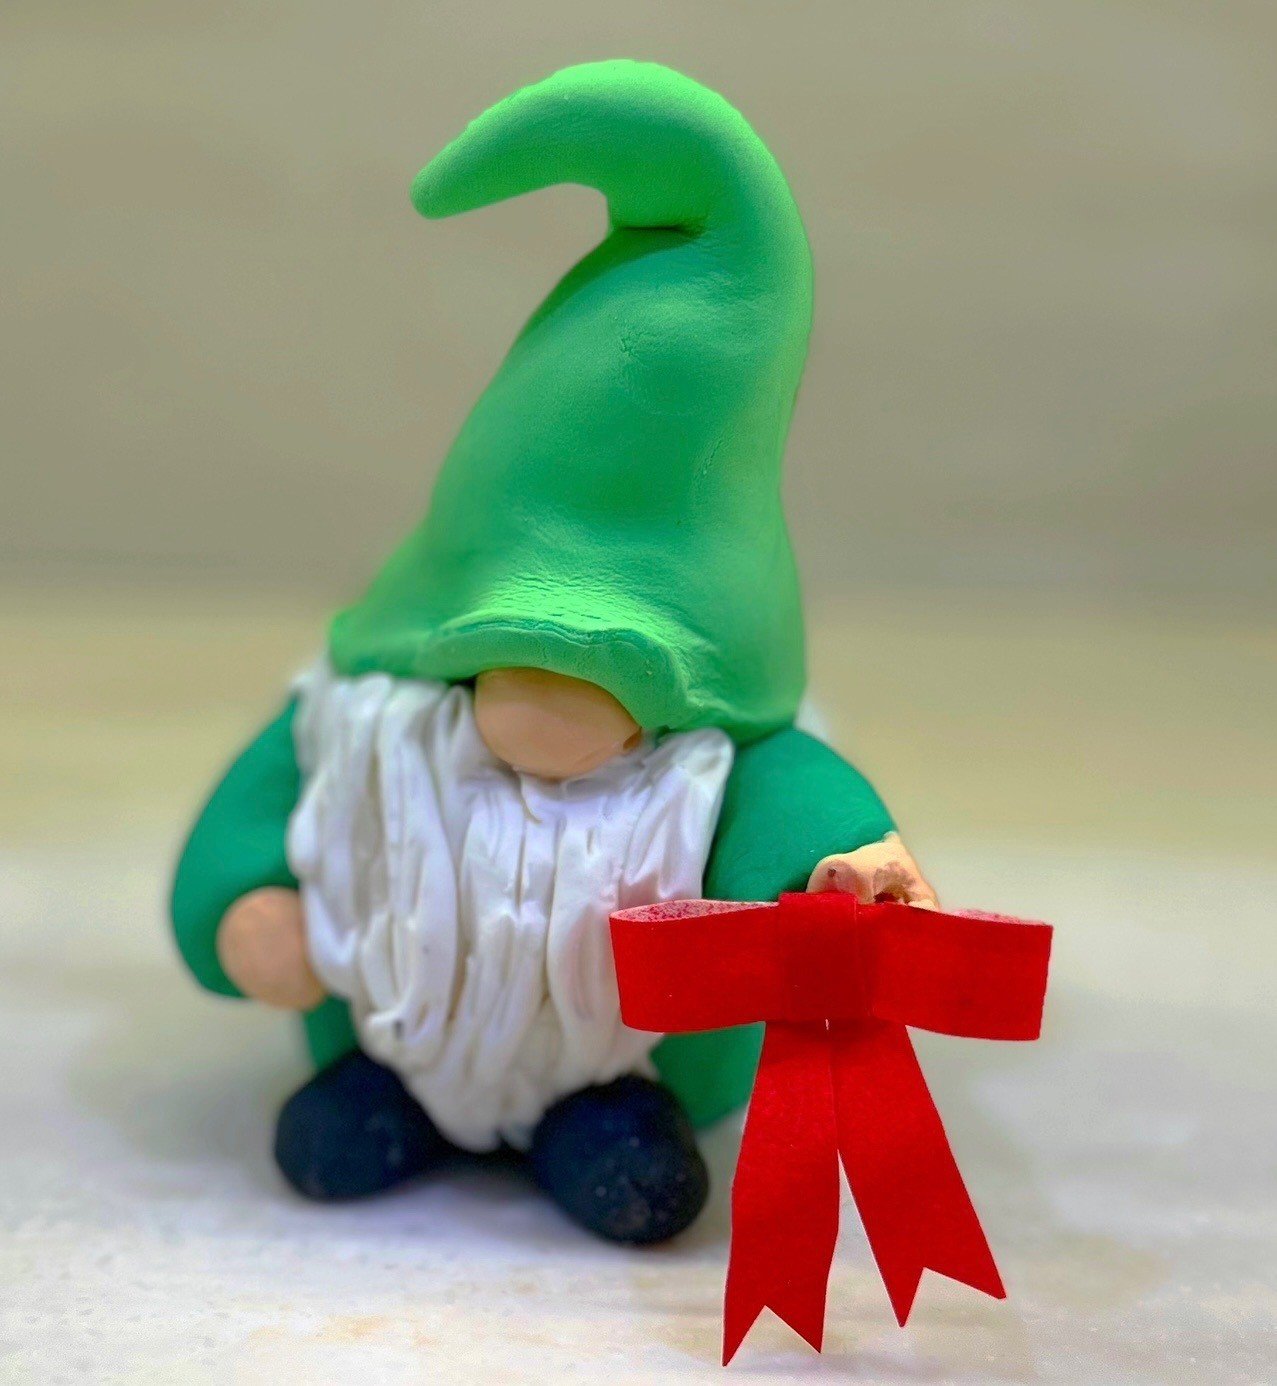 The completed holiday gnome.